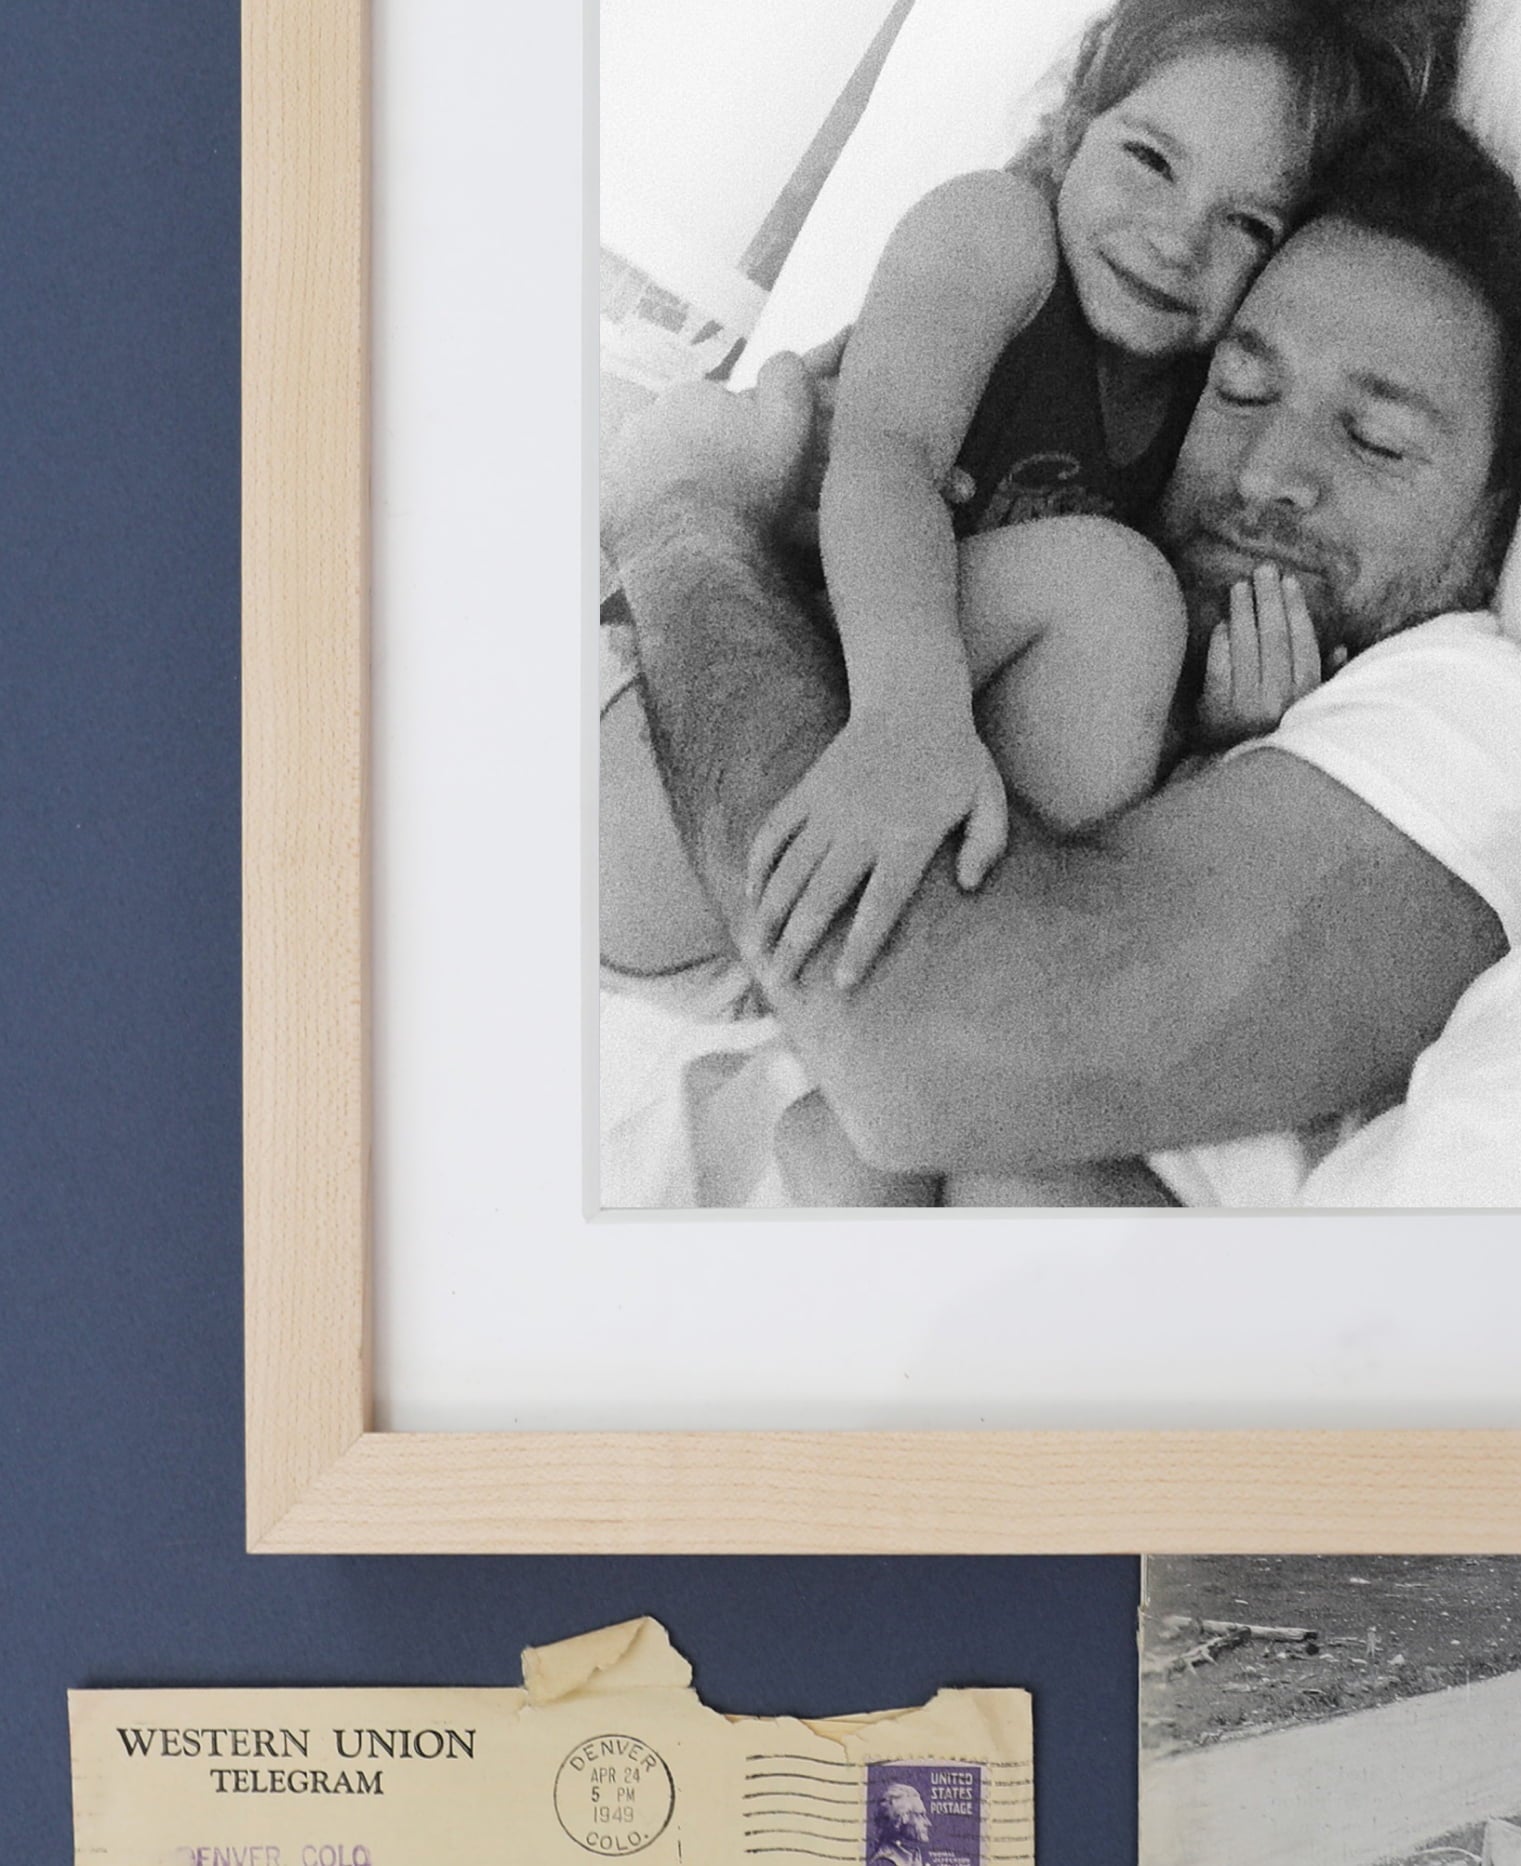 Gallery Frame showcasing photo of father lovingly holding child